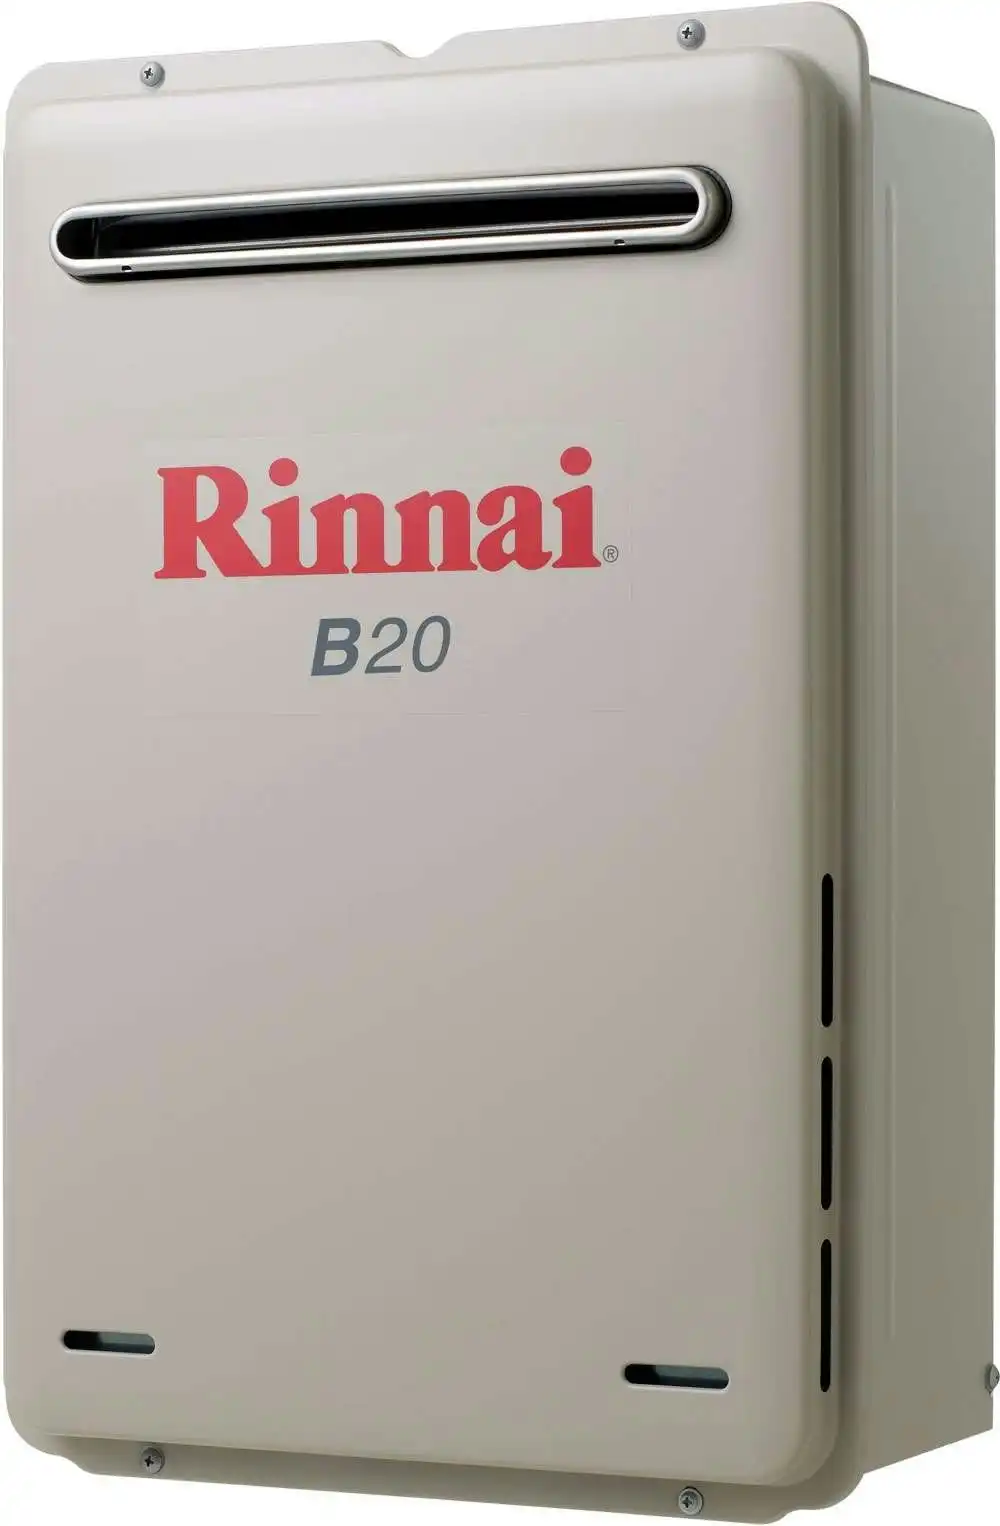 Rinnai Builders 50oC 20L Instant Hot Water System B20N50A B20 *NATURAL GAS*